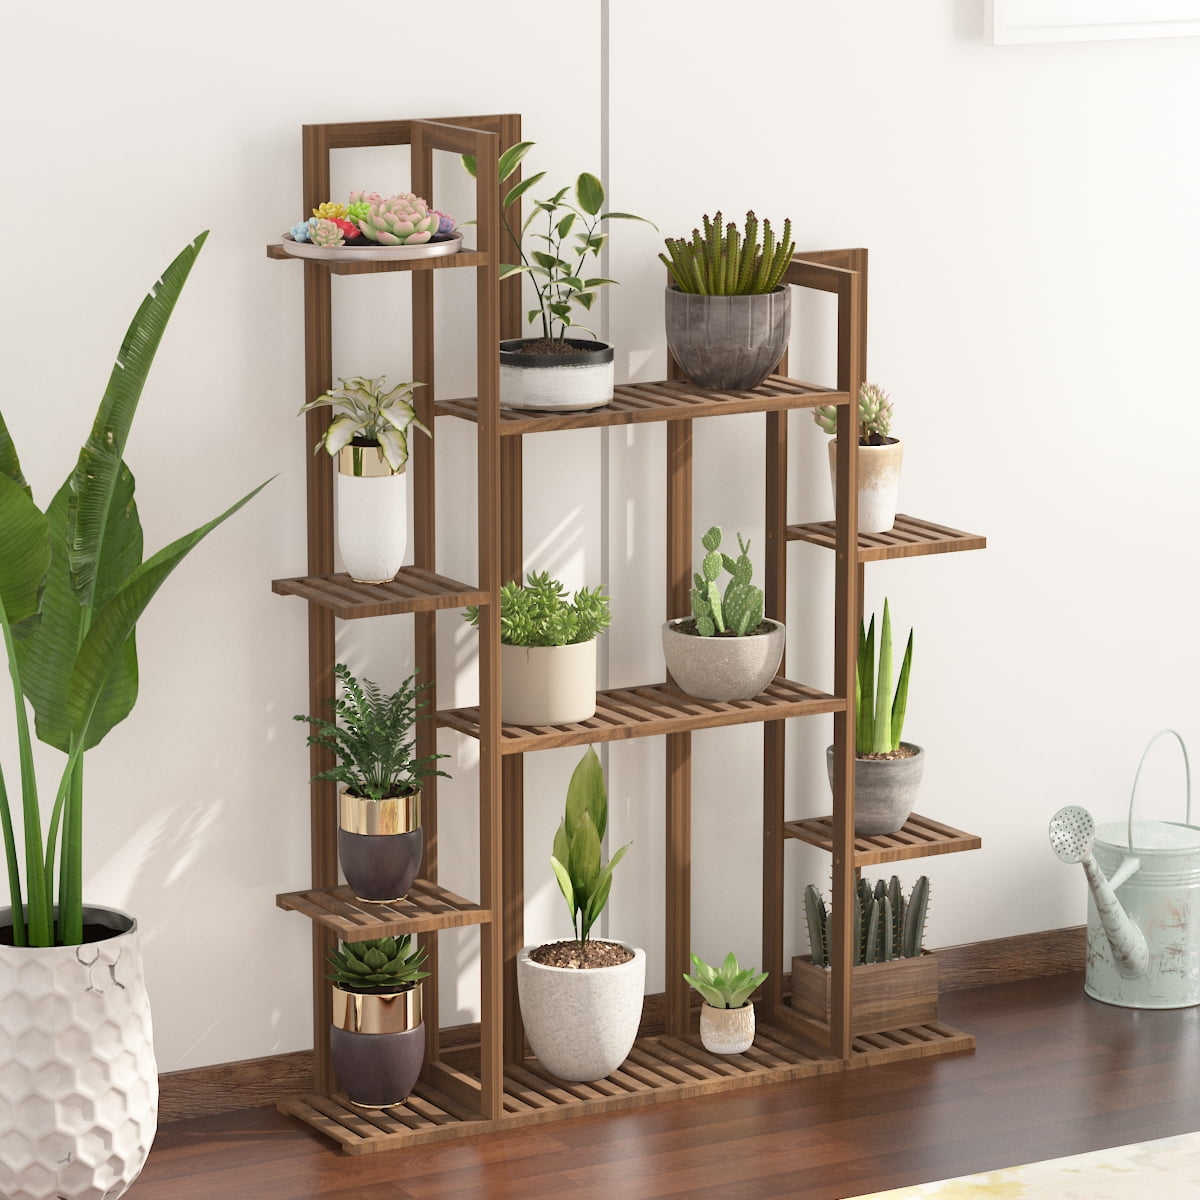 Details about   Large Flower Stand Plant Rack Shelf Bamboo Planter Storage Display Shelving Unit 